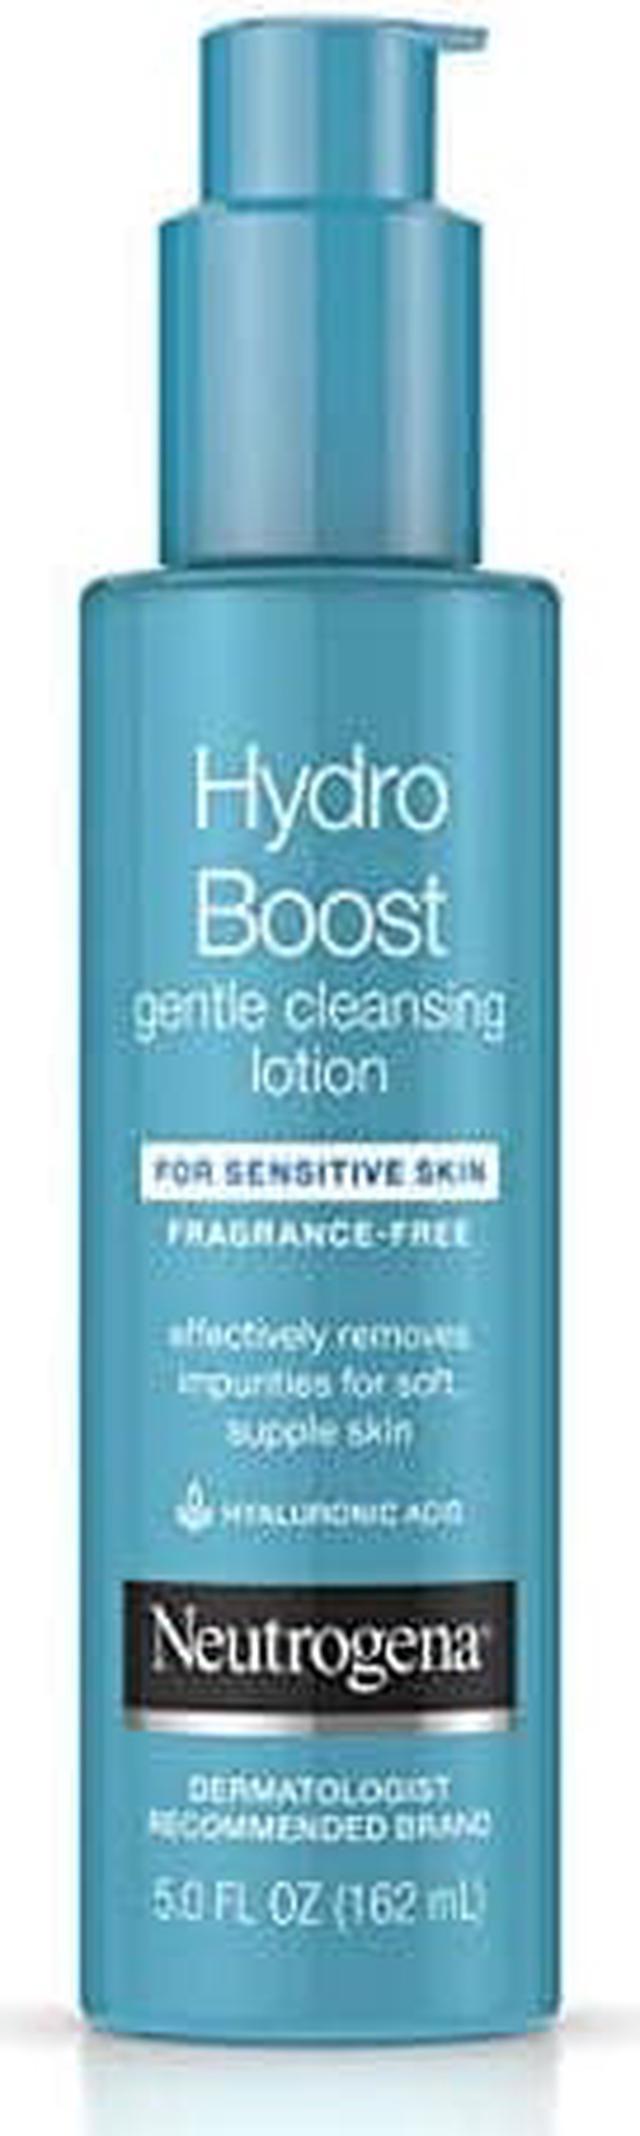 Neutrogena Hydro Boost Gentle Cleansing 5 Ounce Fragrance-Free (147ml) Kitchen Accessories - Newegg.com